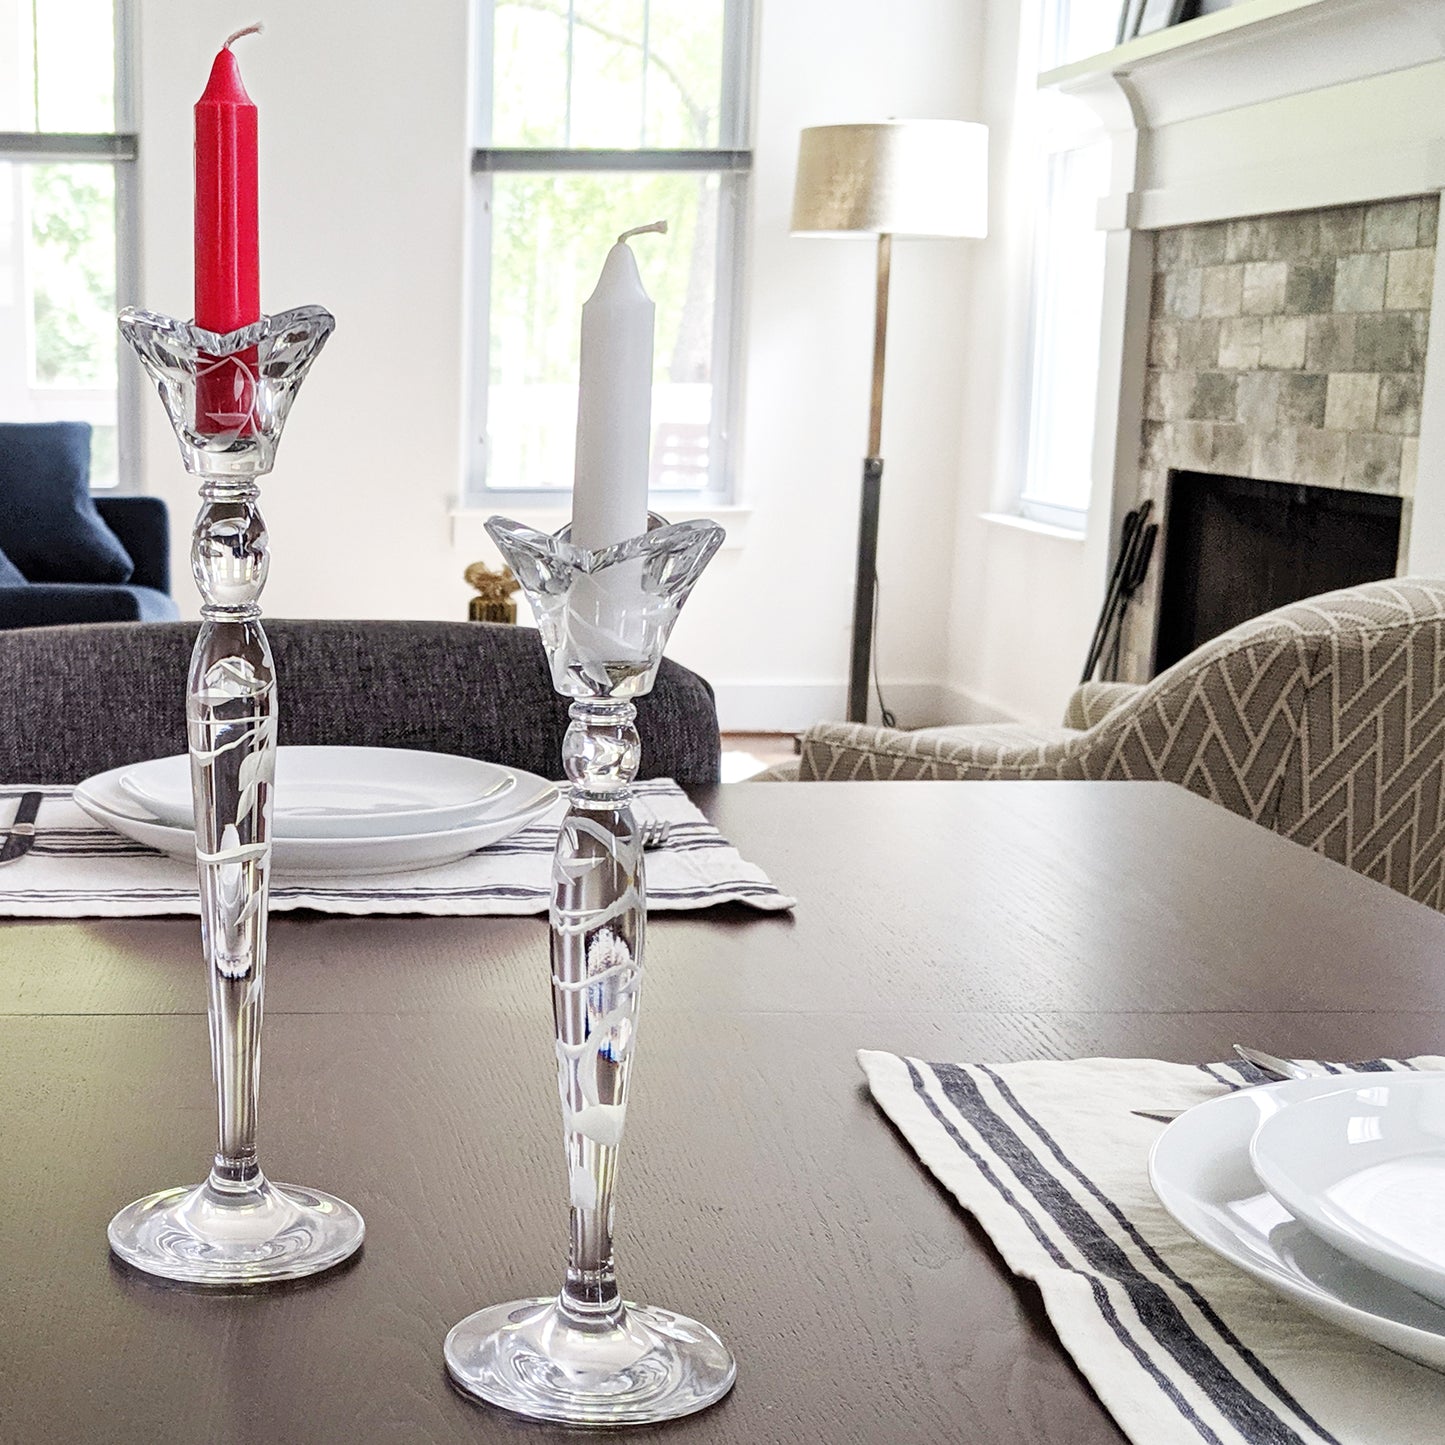 Image, Red and white candles in crystal candle holders, displayed on dining table.